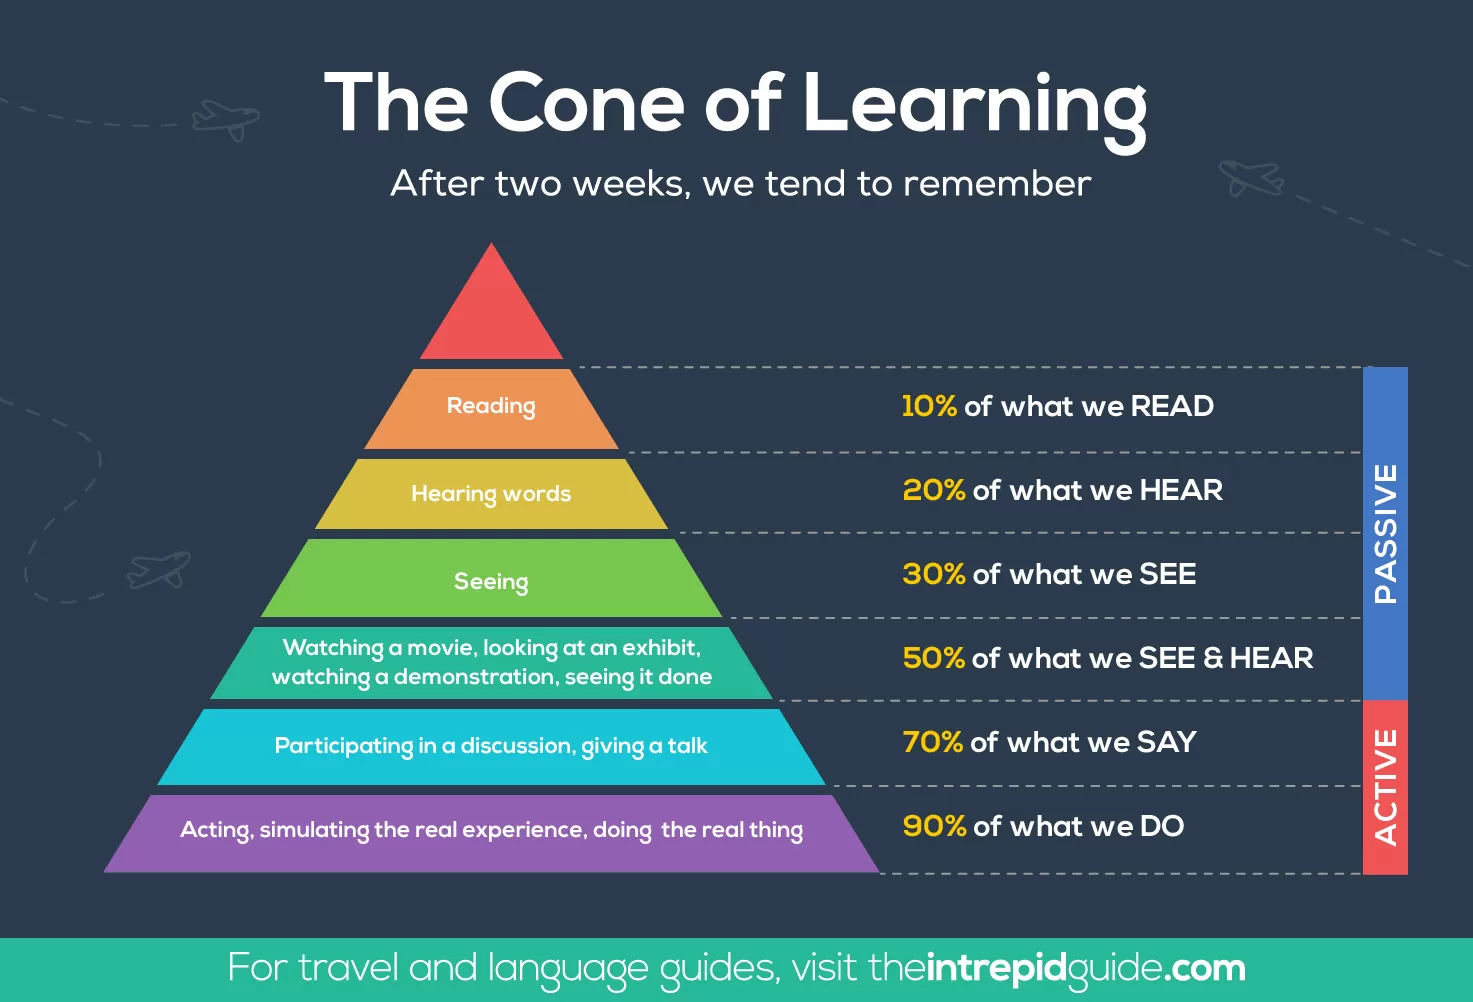 The Cone of Learning - What we remember after 2 weeks